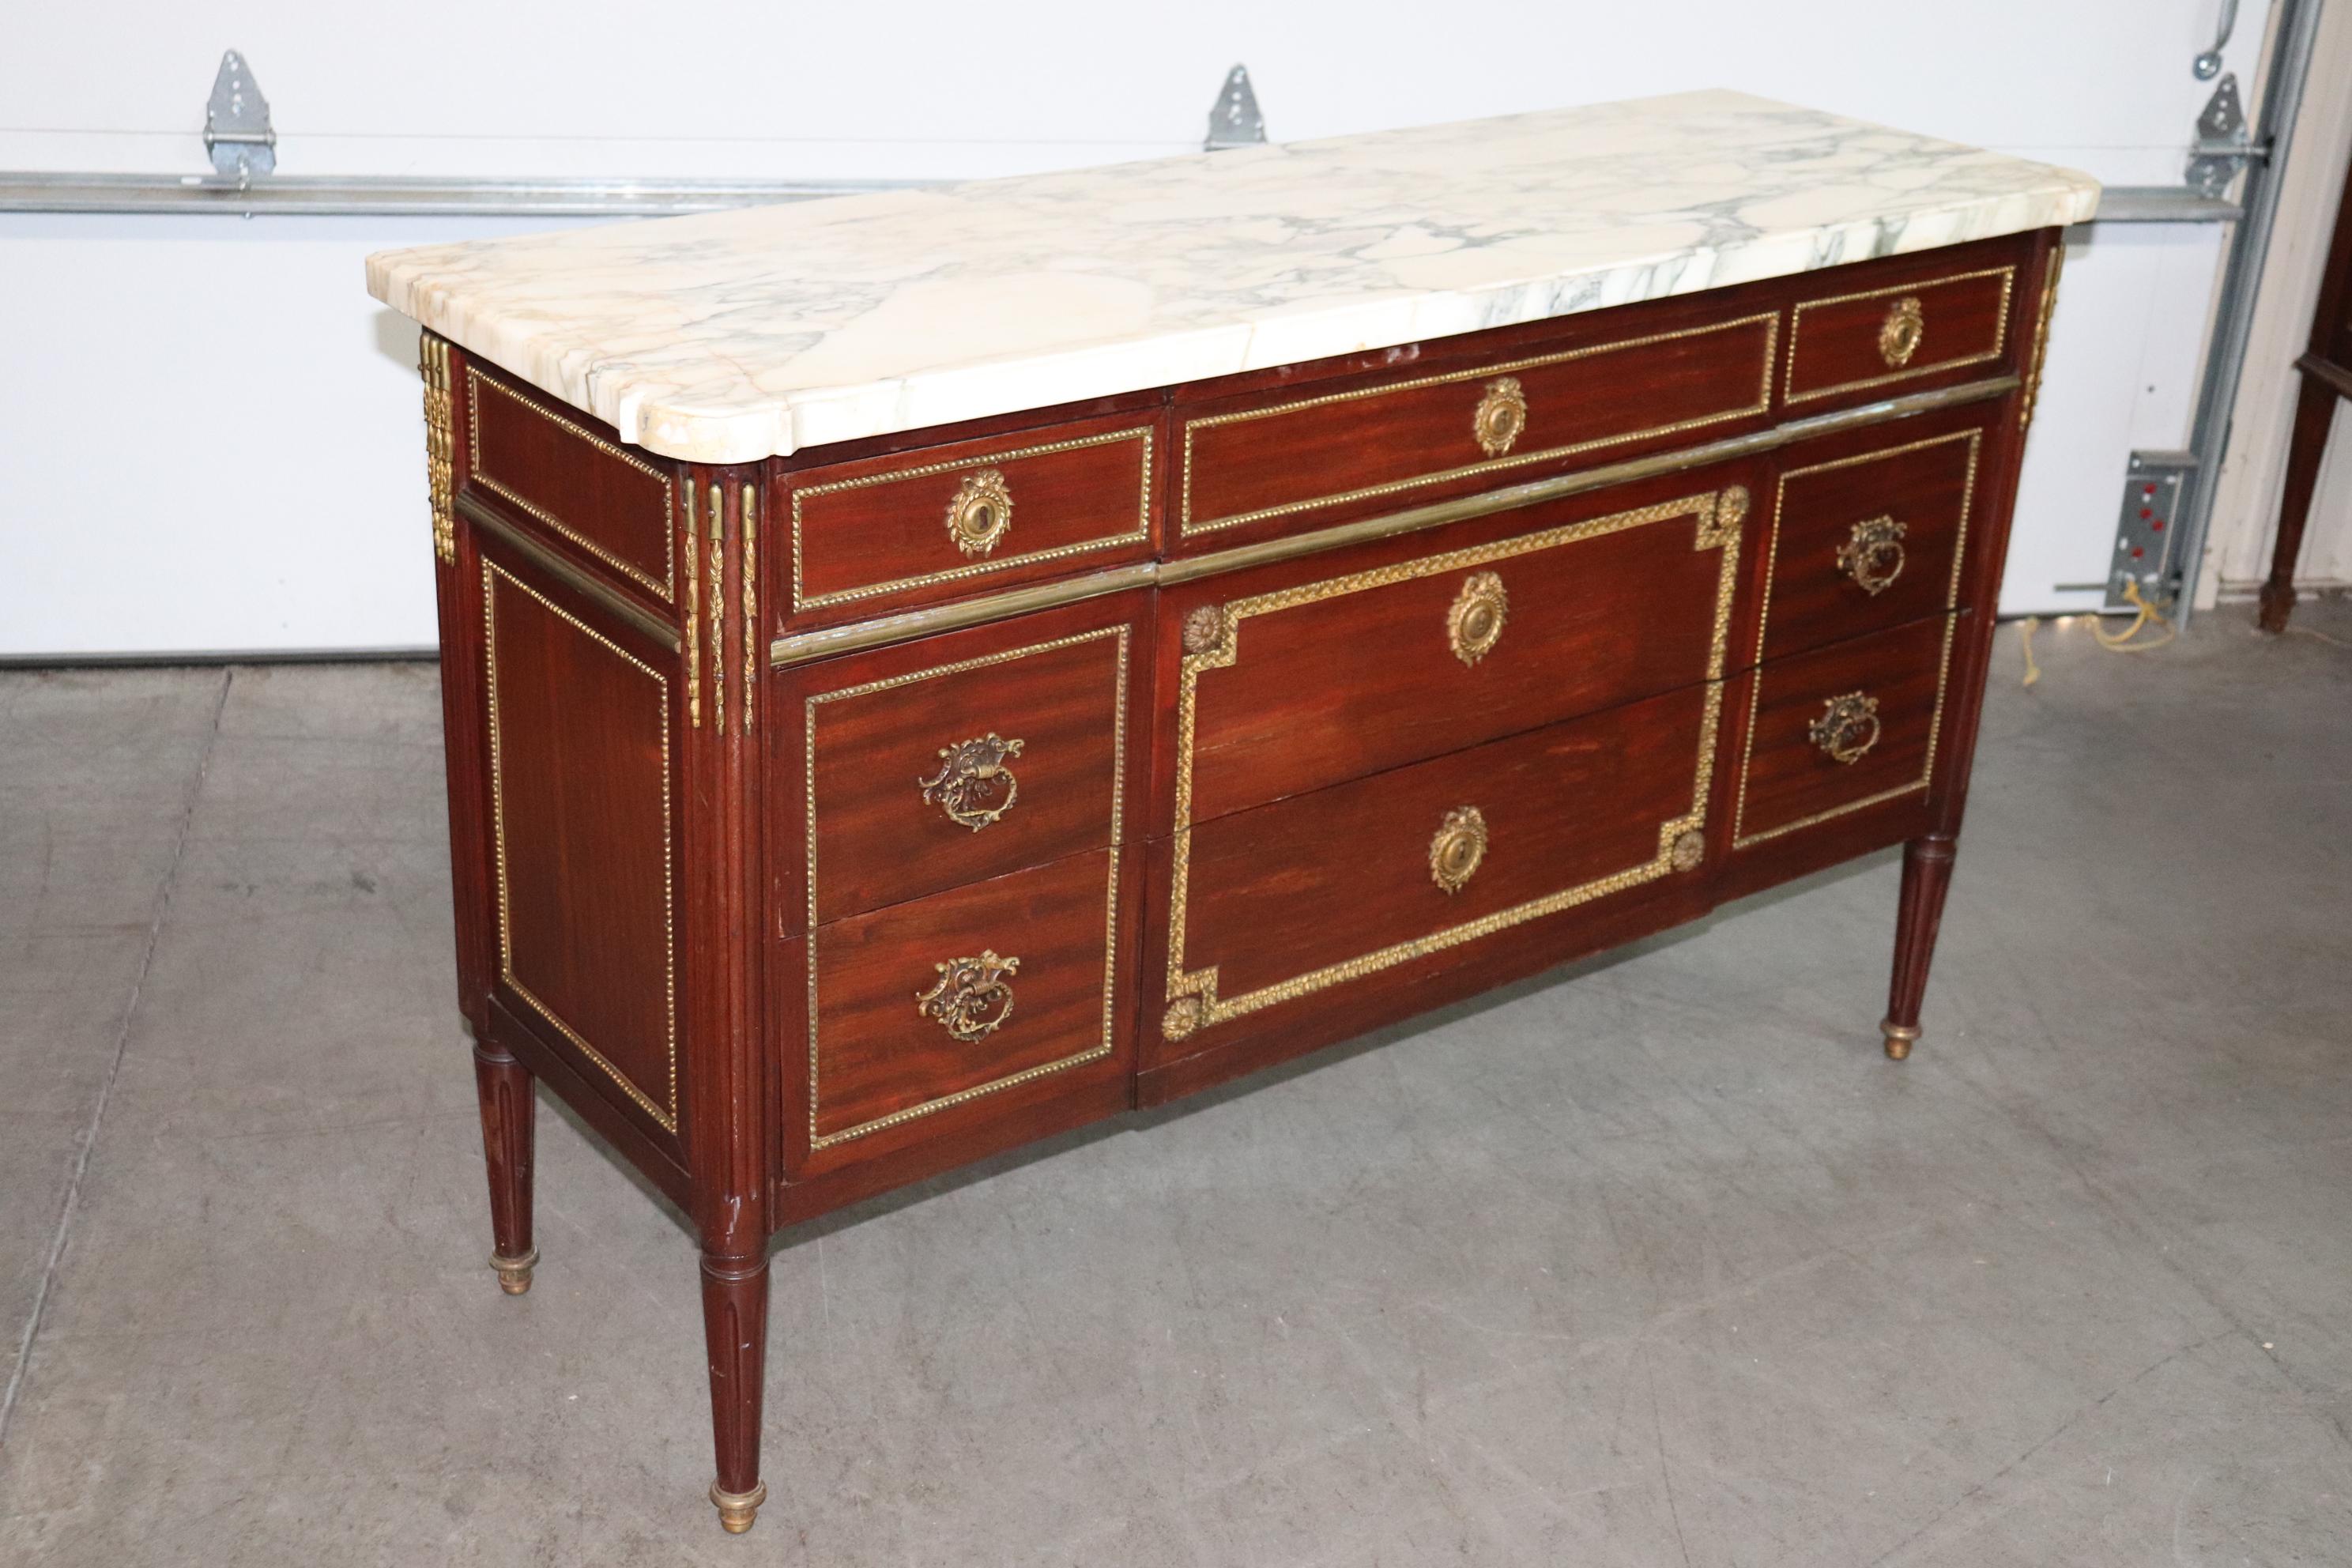 This is a fantastic, entirely original, stamped Maison Jansen commode in very good condition for its age. This 1940-50s era features gorgeous bronze ormolu and a beautiful slab of varigated marble top. The commode is designed with superb proportions